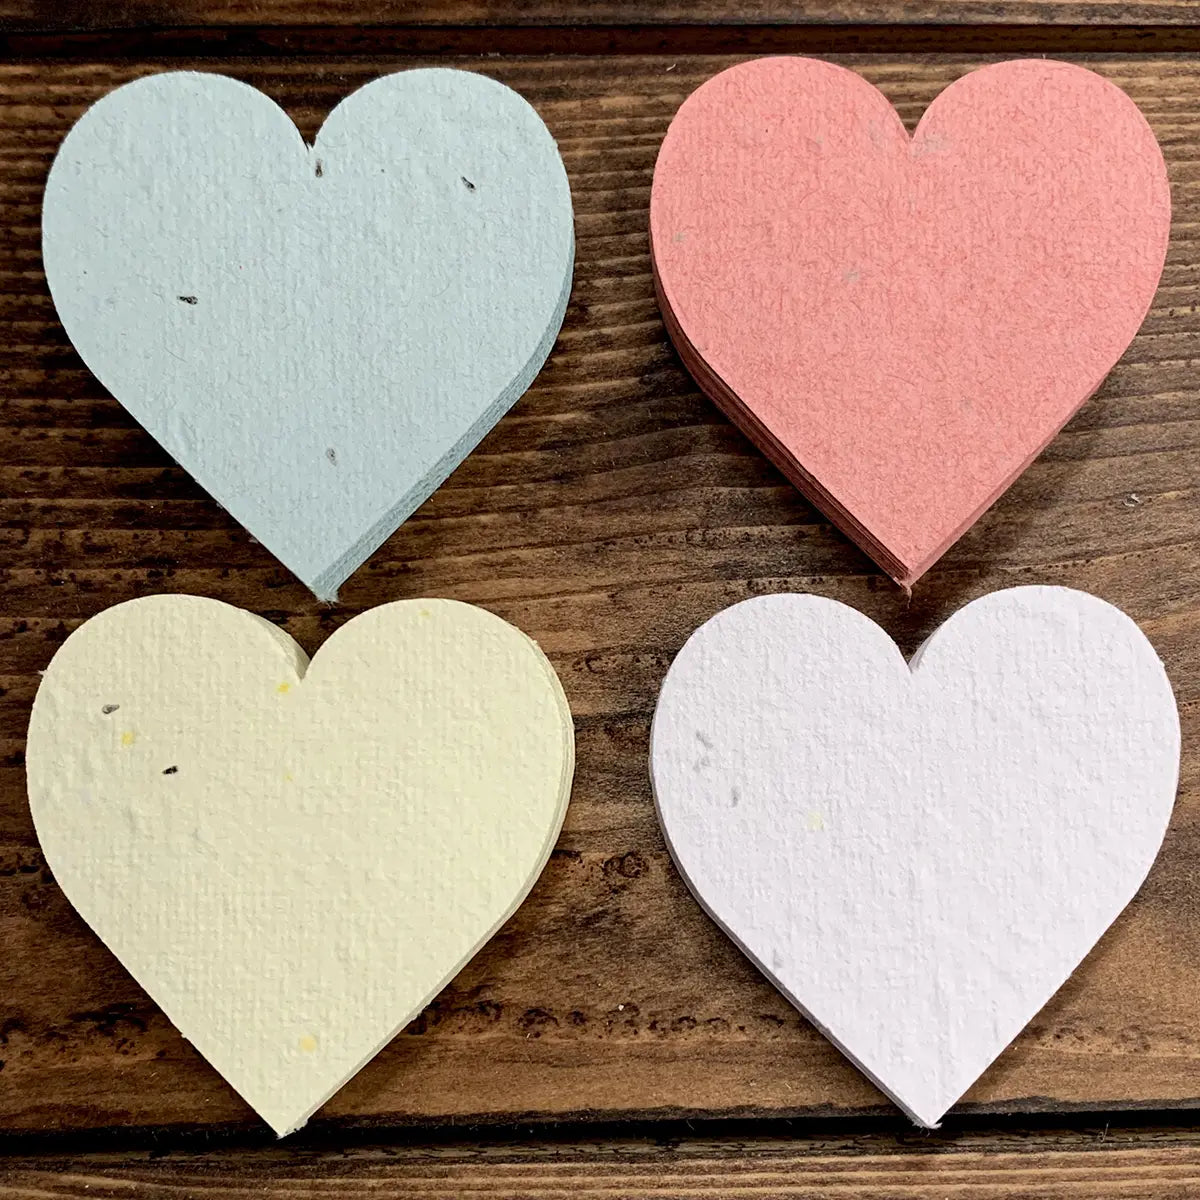 Paper-Go-Round Seed Paper / HEART SHAPES